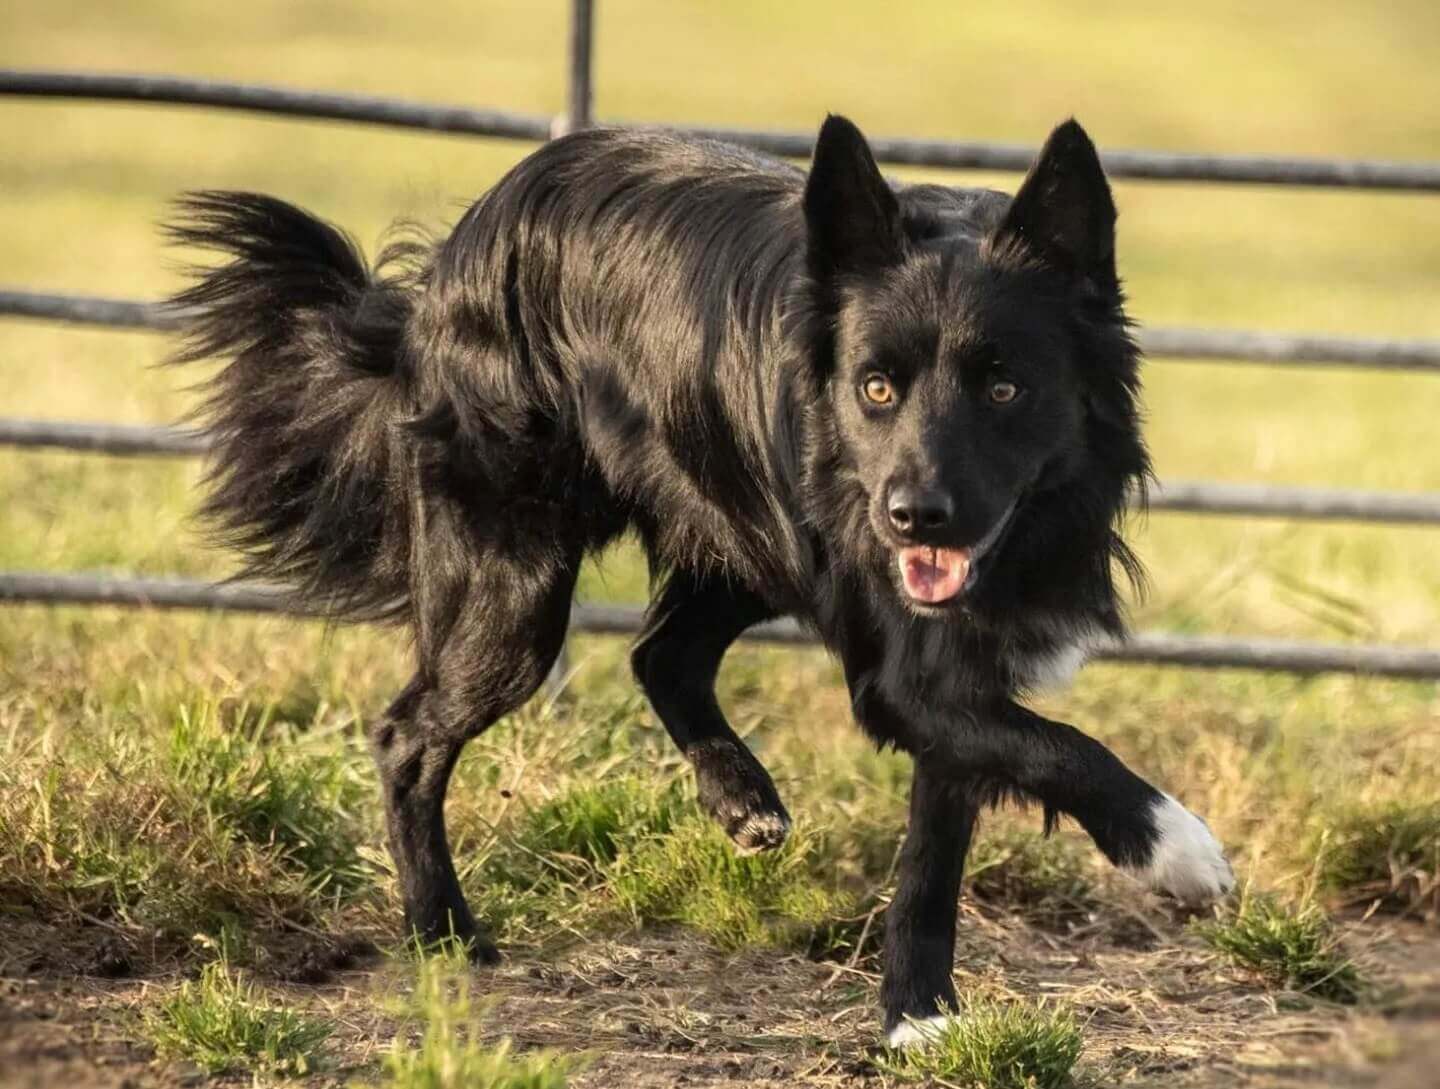 A black border collie with white on its feet and chest.